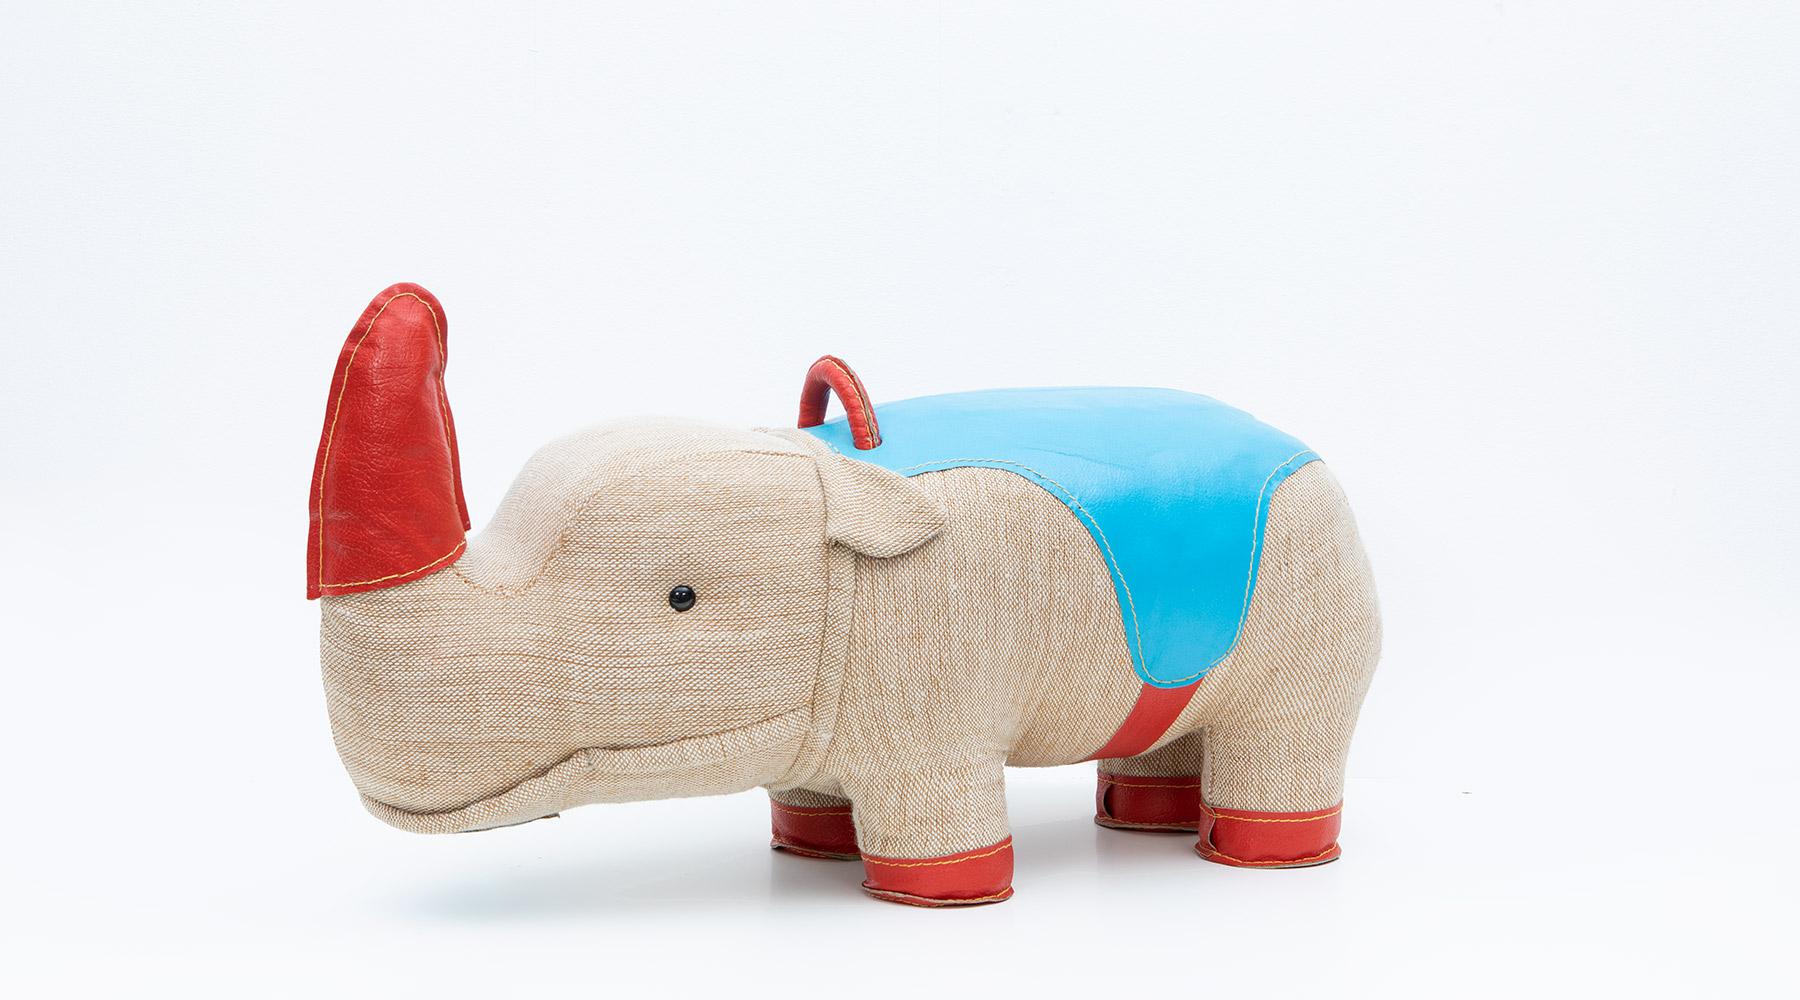 Rhino, children toy in jute and leather by Renate Müller, Germany, 1967.

Original rhino animal toy from the 1960s by Renate Müller. Unparalleled in shape and workmanship. This example shows a rhino made of jute and leather details coloured red